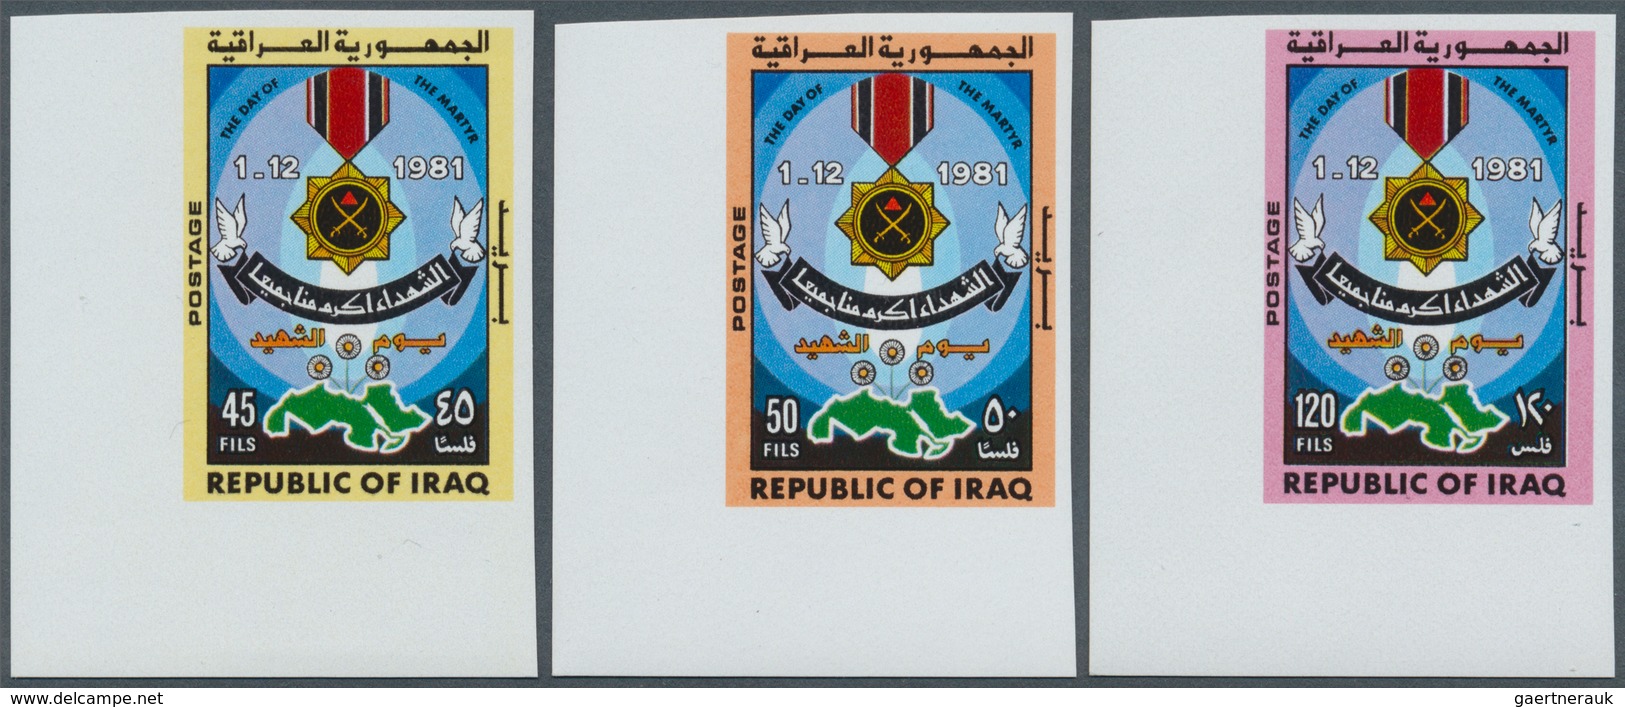 Irak: 1981, Lot Of 2 Complete IMPERFORATED Sets "Martyrs' Day": The First Set Containing The Postage - Iraq